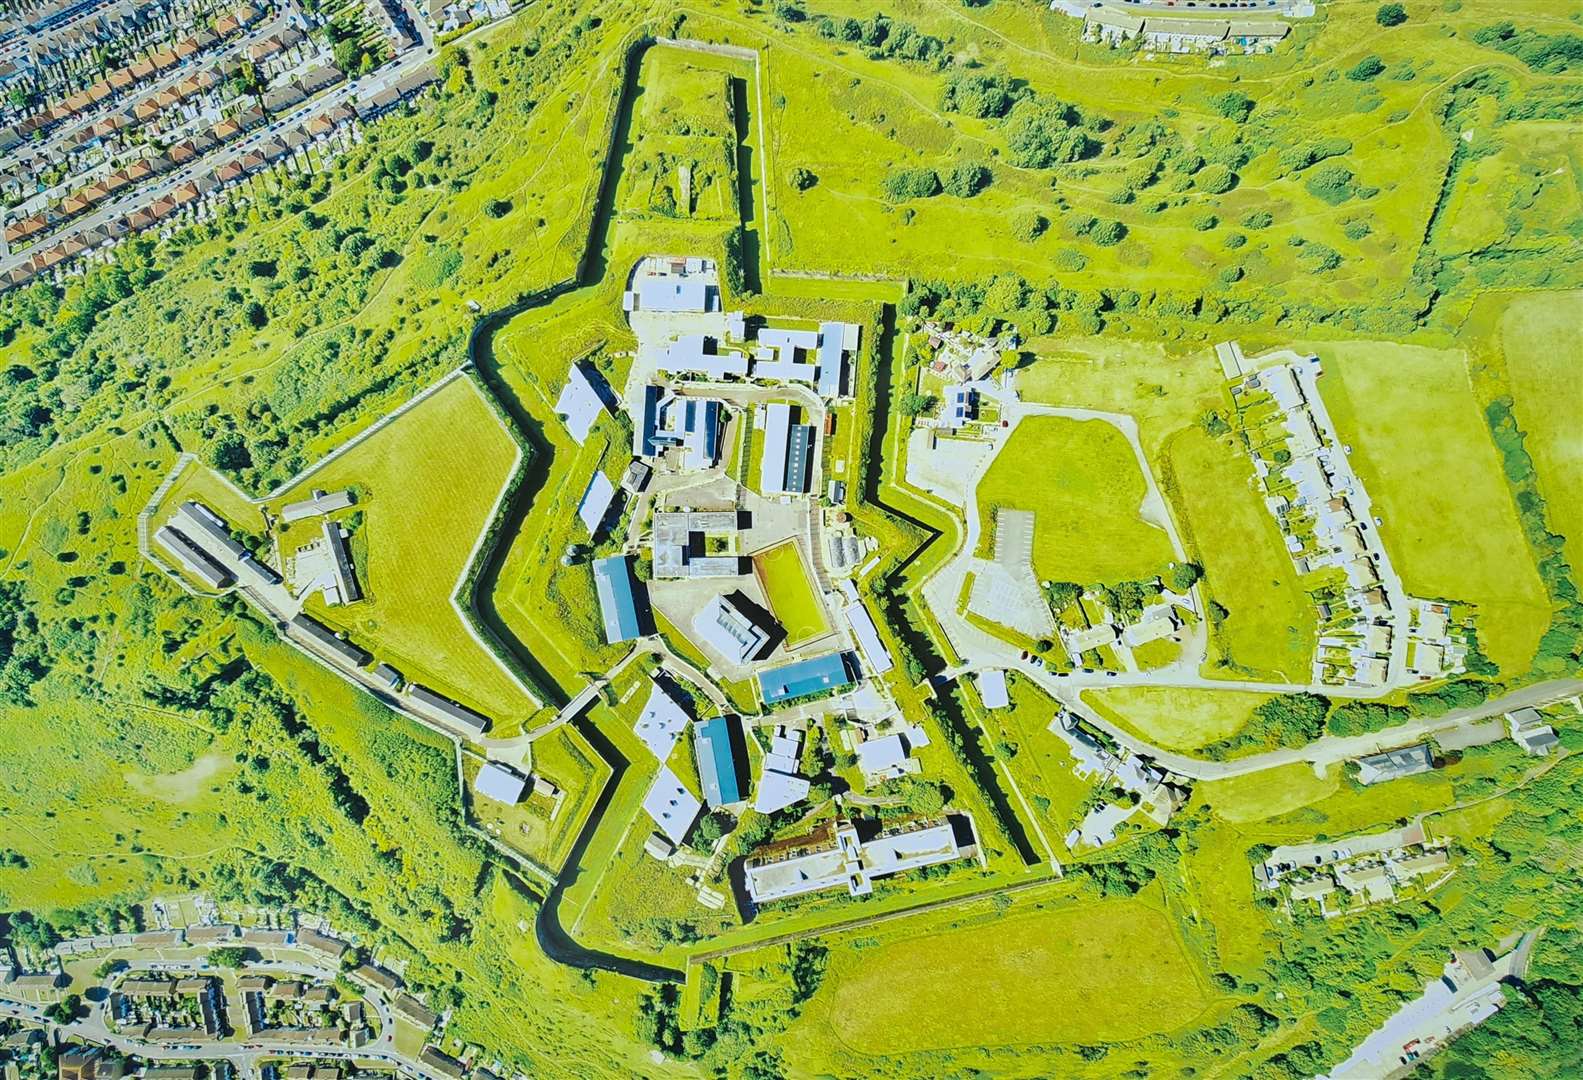 There are big plans afoot for the the Citadel complex, which has previously been used as a fort and prison. Picture: Dover Citadel Ltd